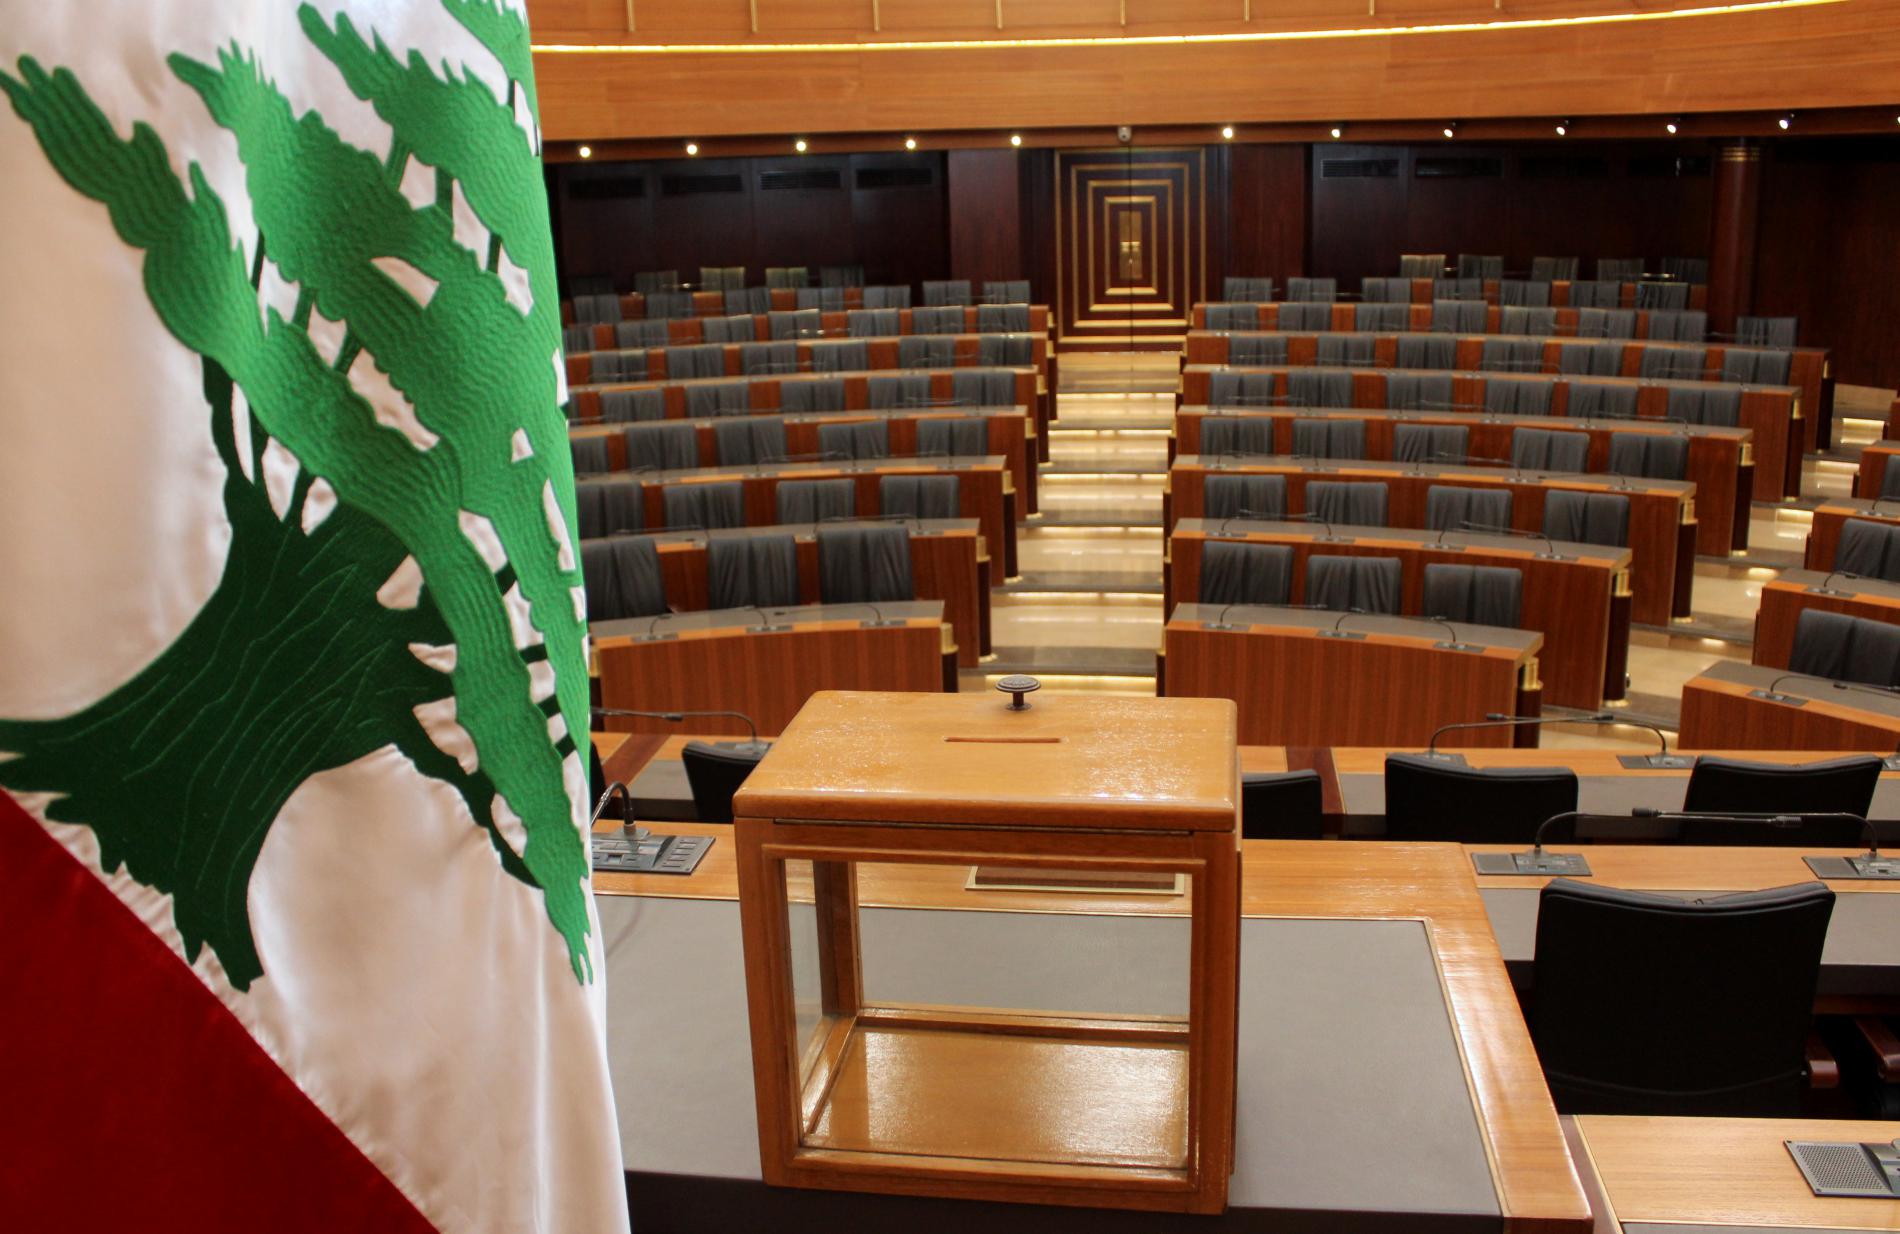 Lebanon fails to elect pres. for 45th time